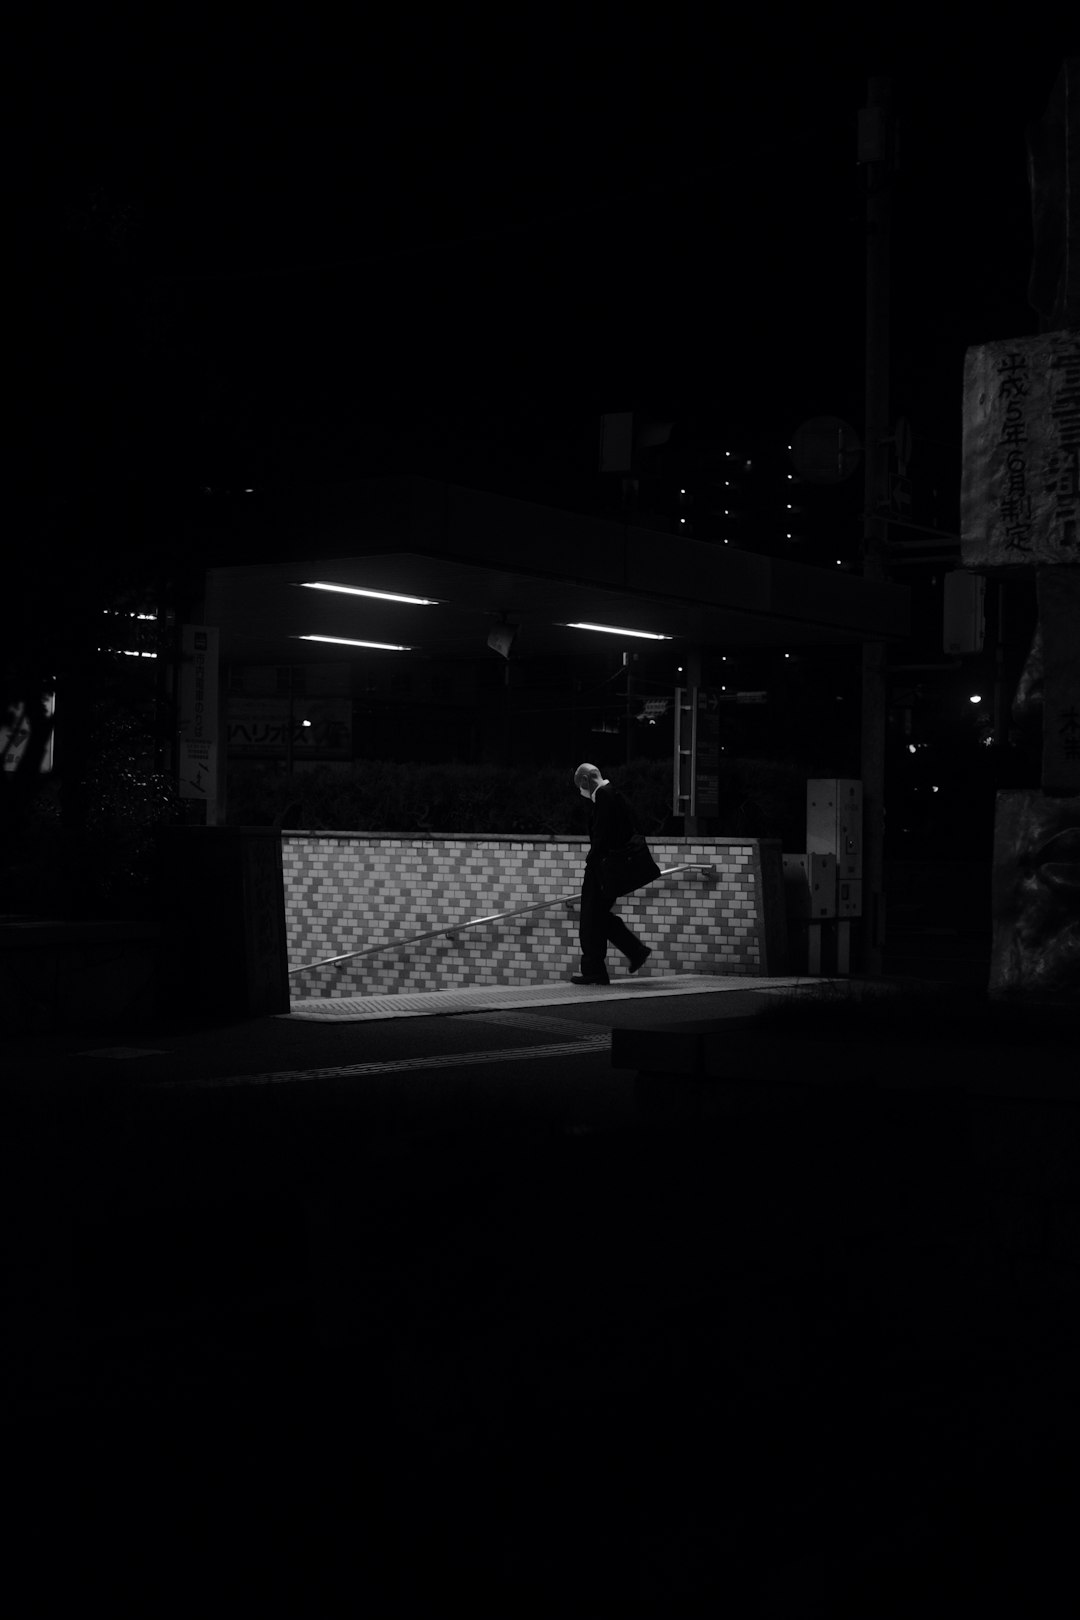 grayscale photo of man in black shirt standing near building